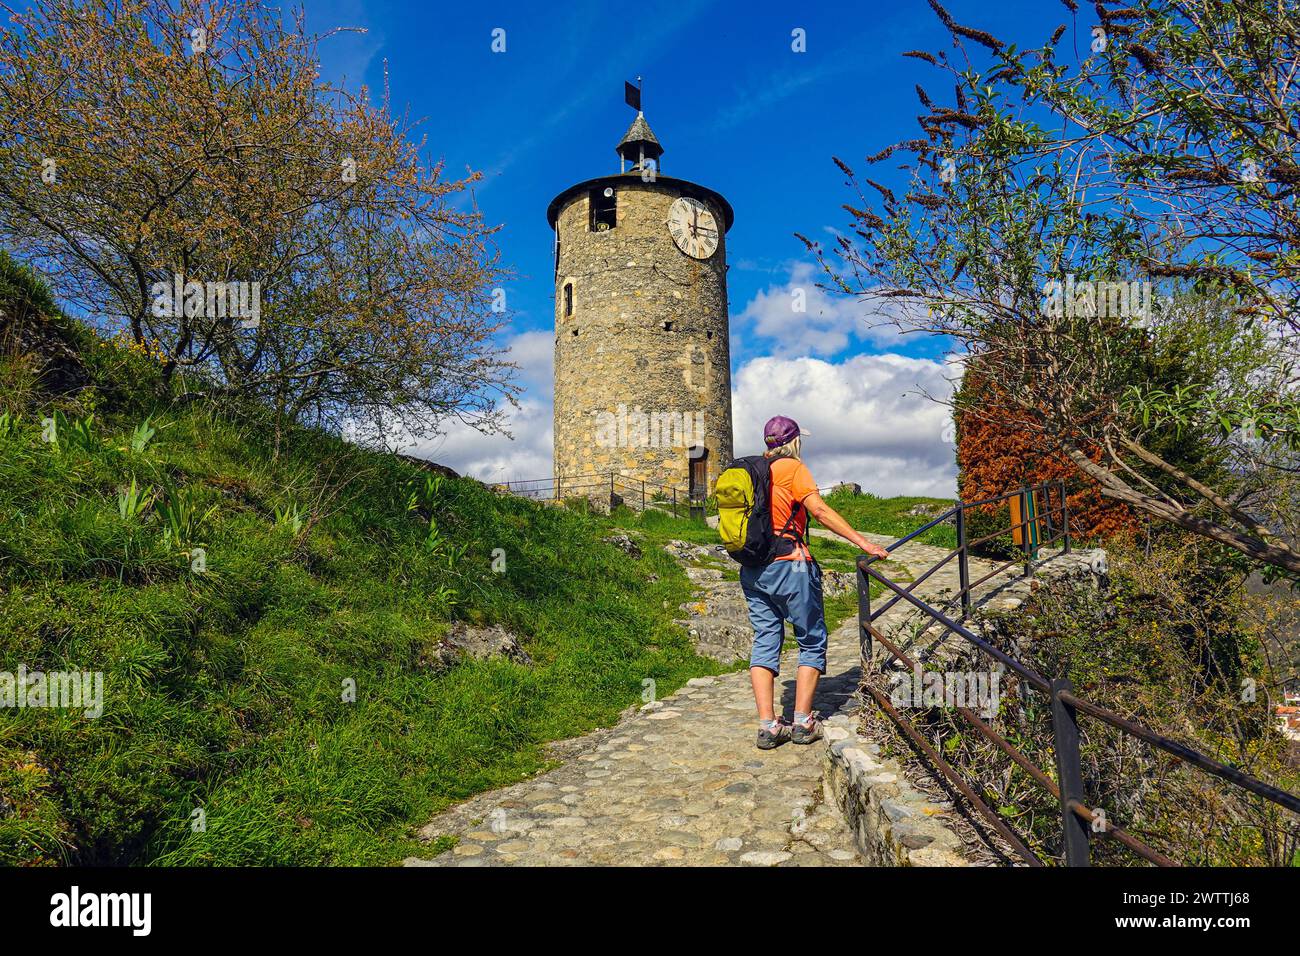 Old clock tower above Tarascon sur Ariege area of the French Pyrenees, Ariege, France Stock Photo